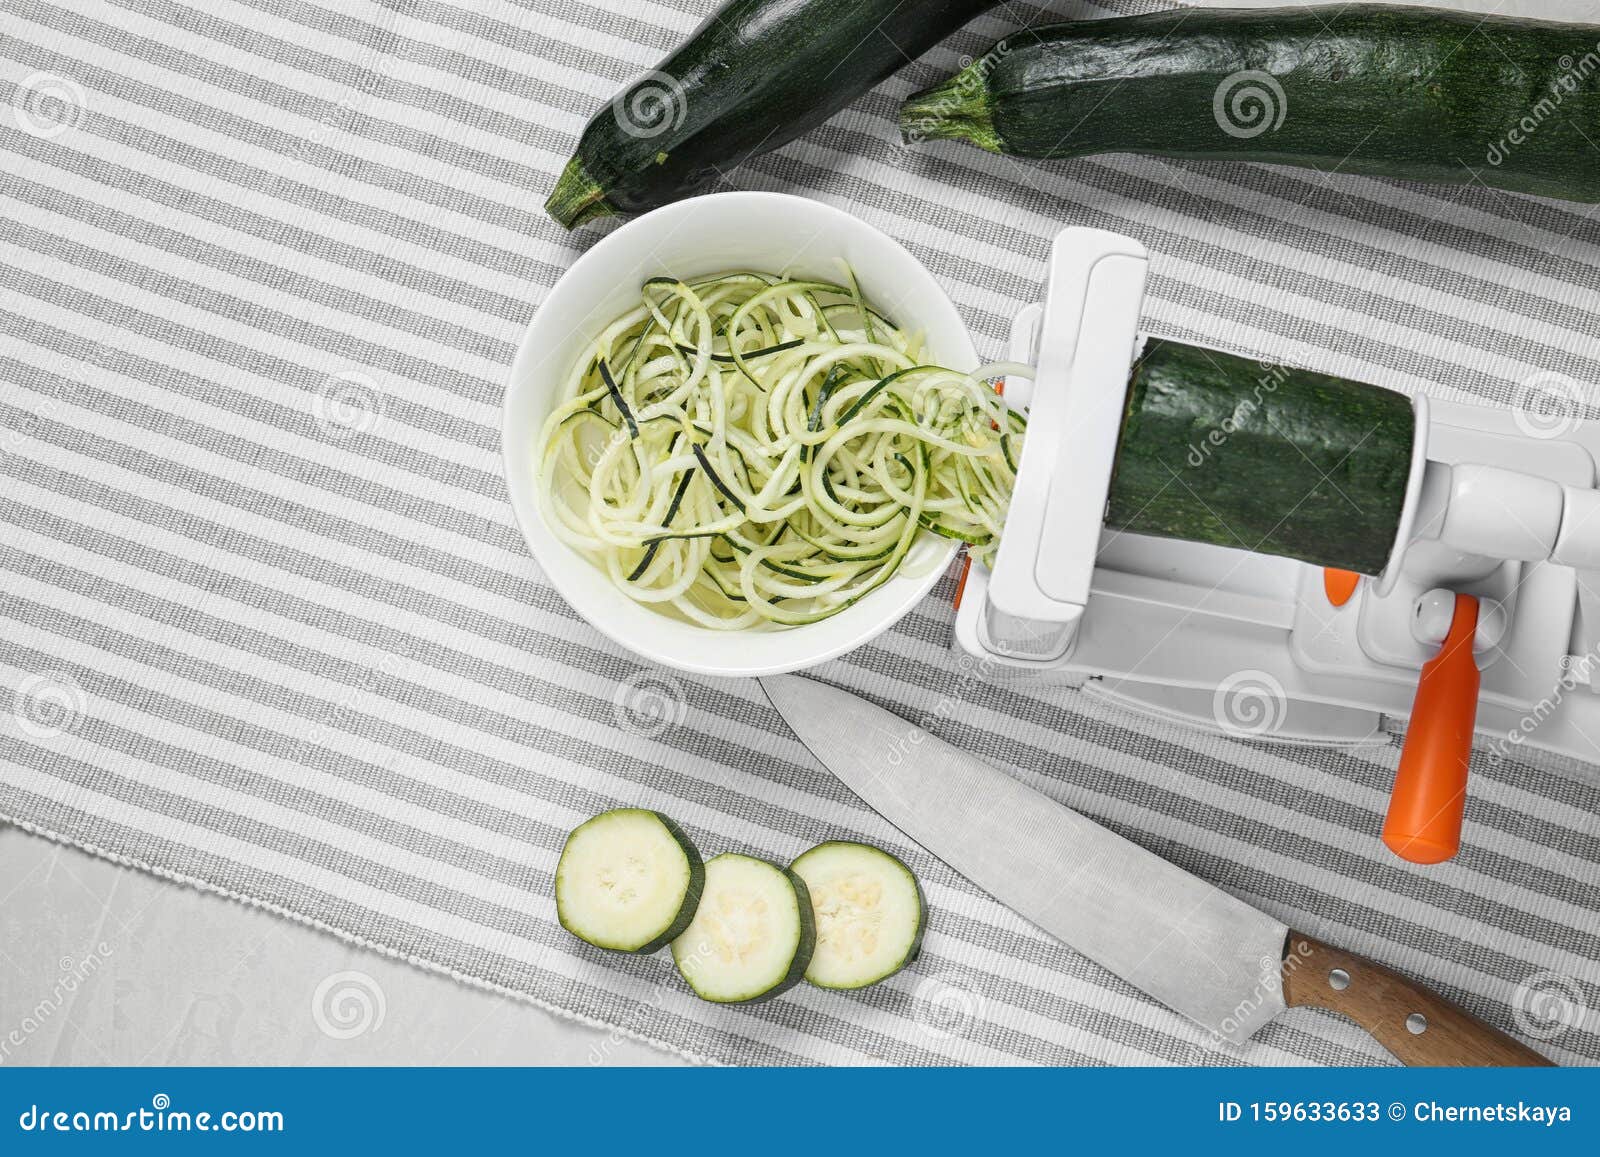 Making Zucchini Noodles with Spiral Slicer on Table Stock Image